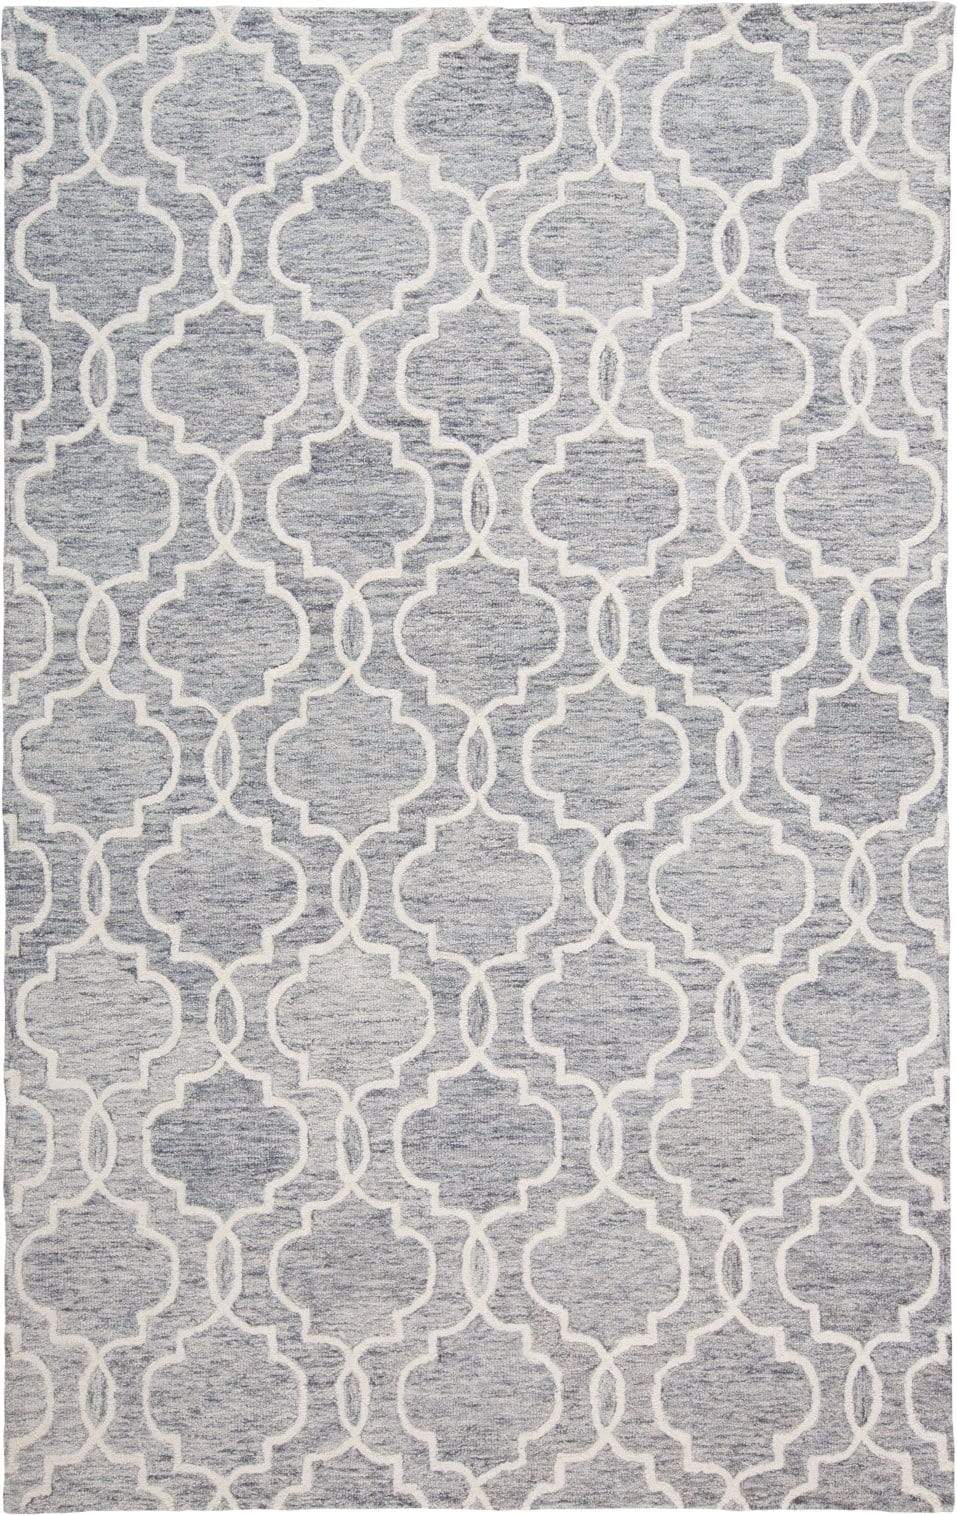 Feizy Feizy Belfort Modern Minimalist Trellis Pattern Rug - Gray & Ivory - Available in 4 Sizes 5' x 8' 8698775FGRYIVYE10